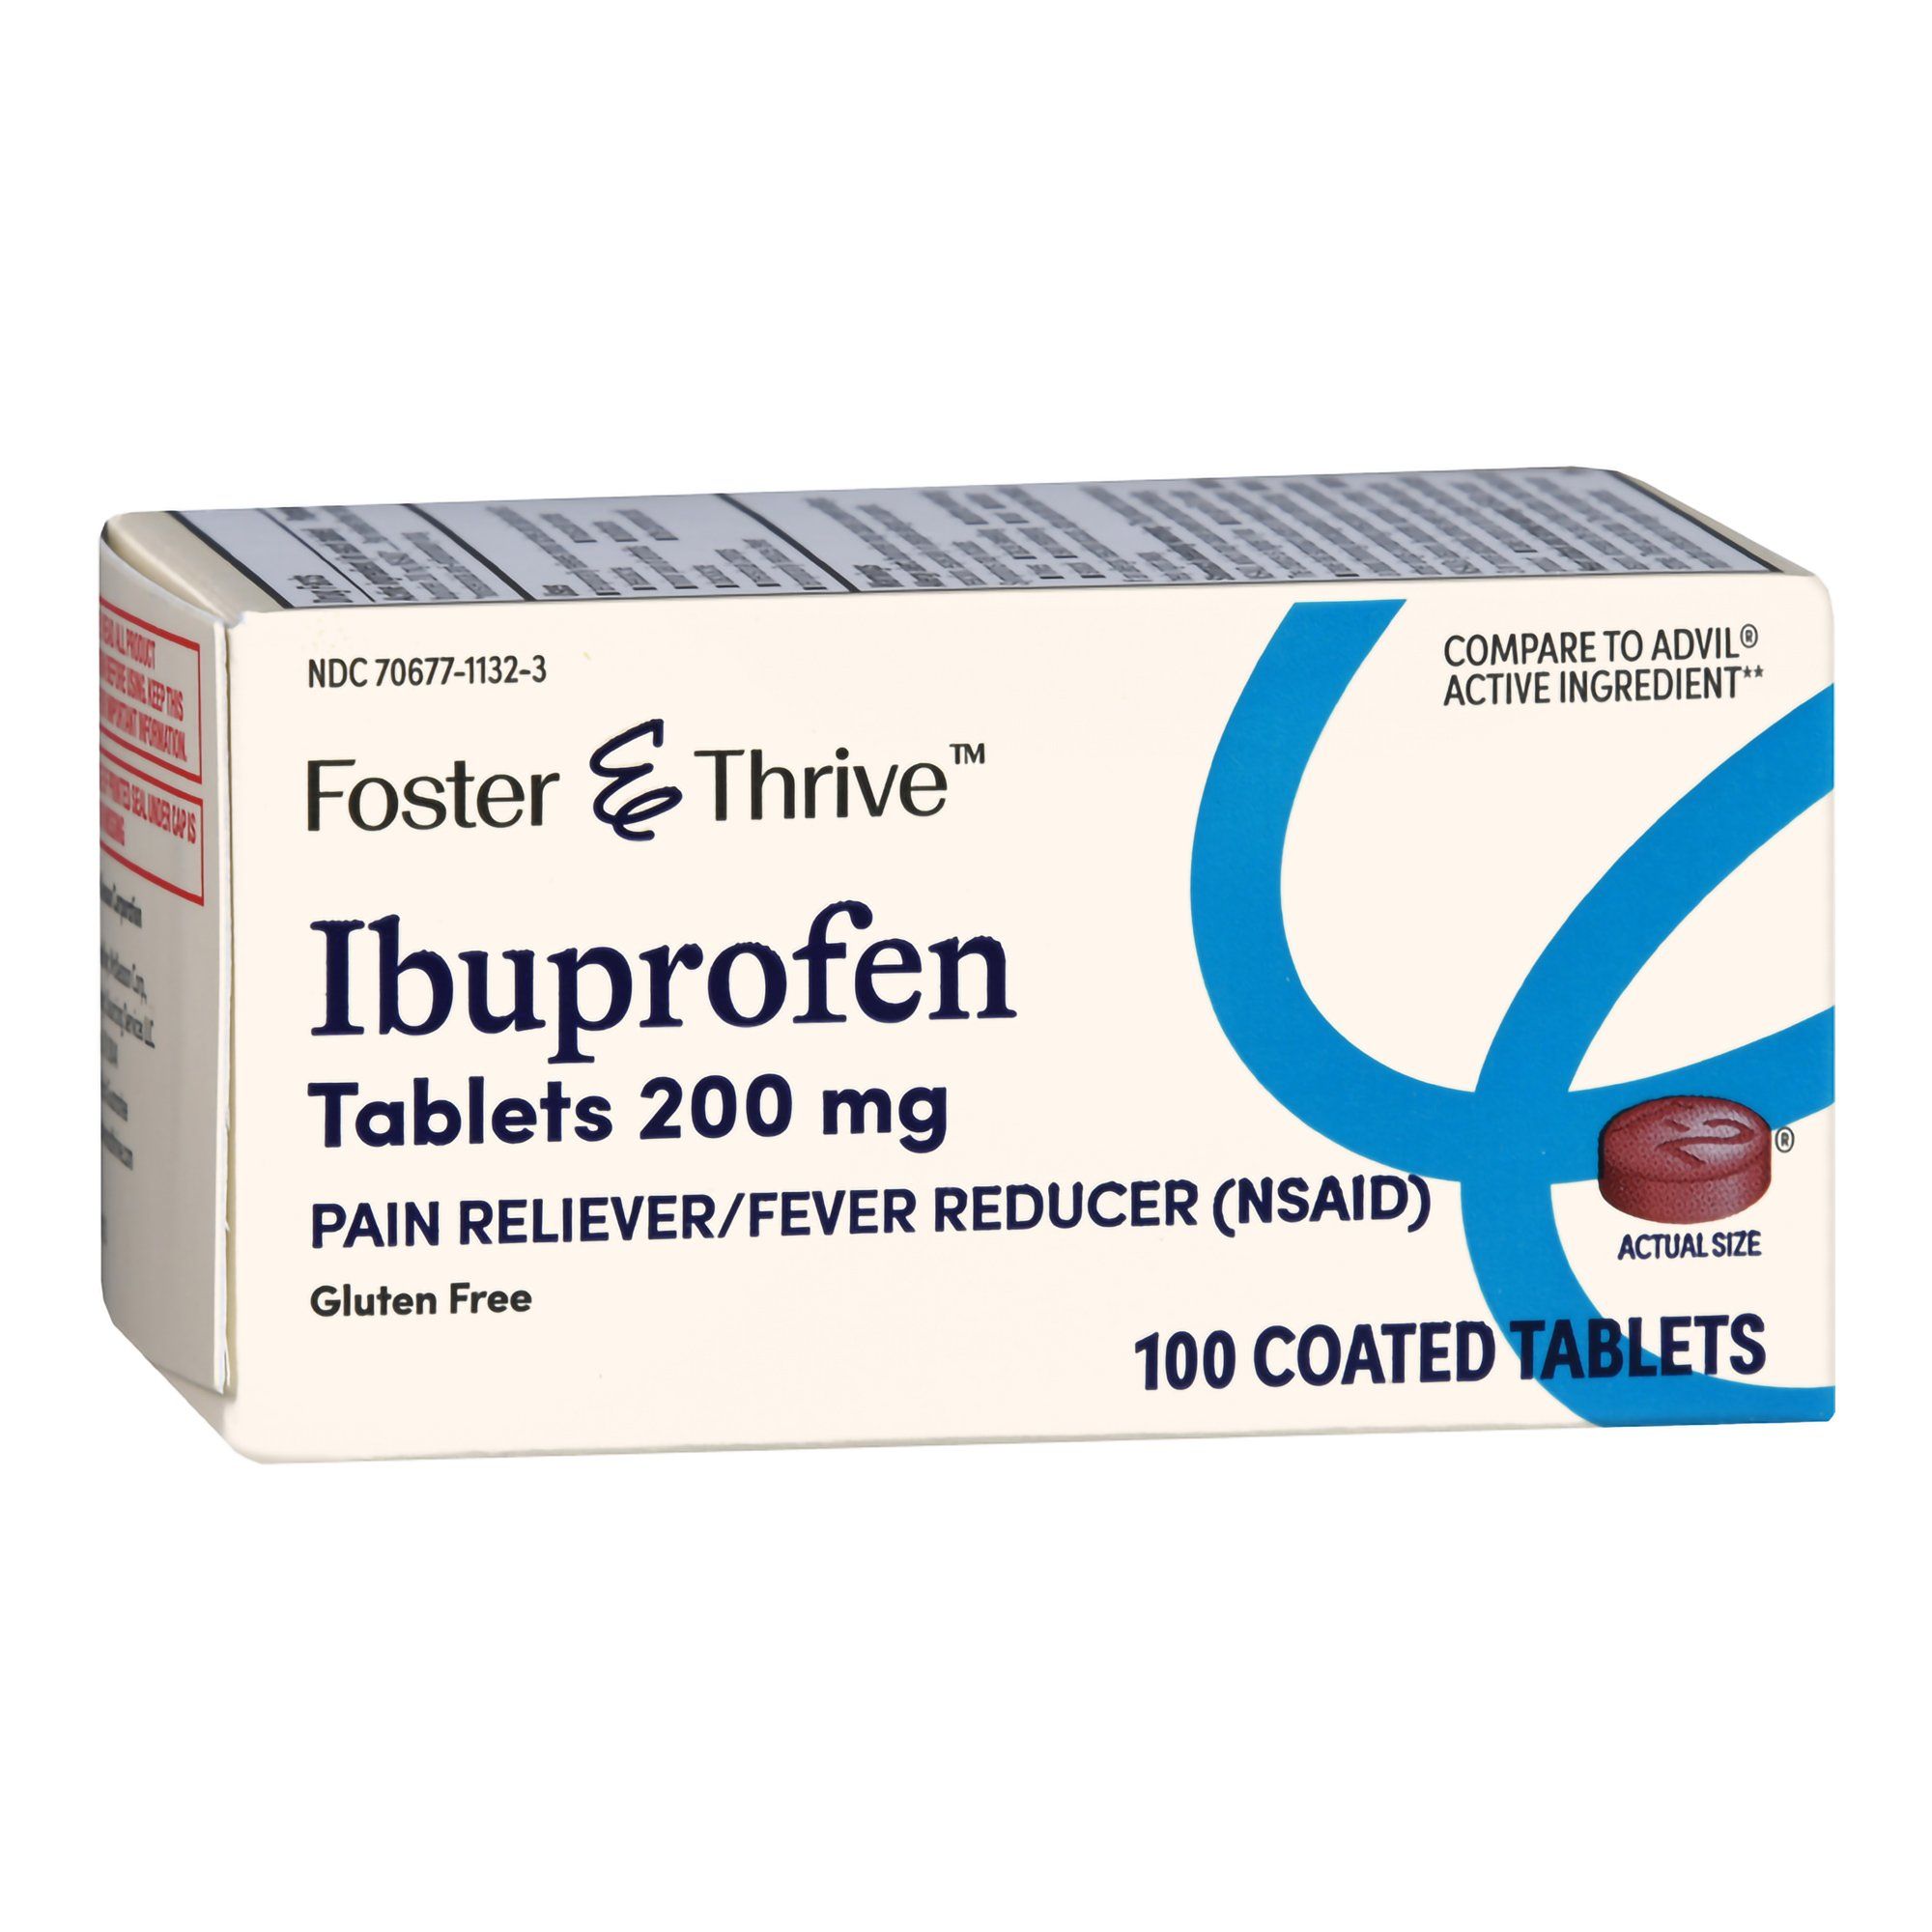 Foster & Thrive Ibuprofen Coated Tablets, 200 mg - 100 ct